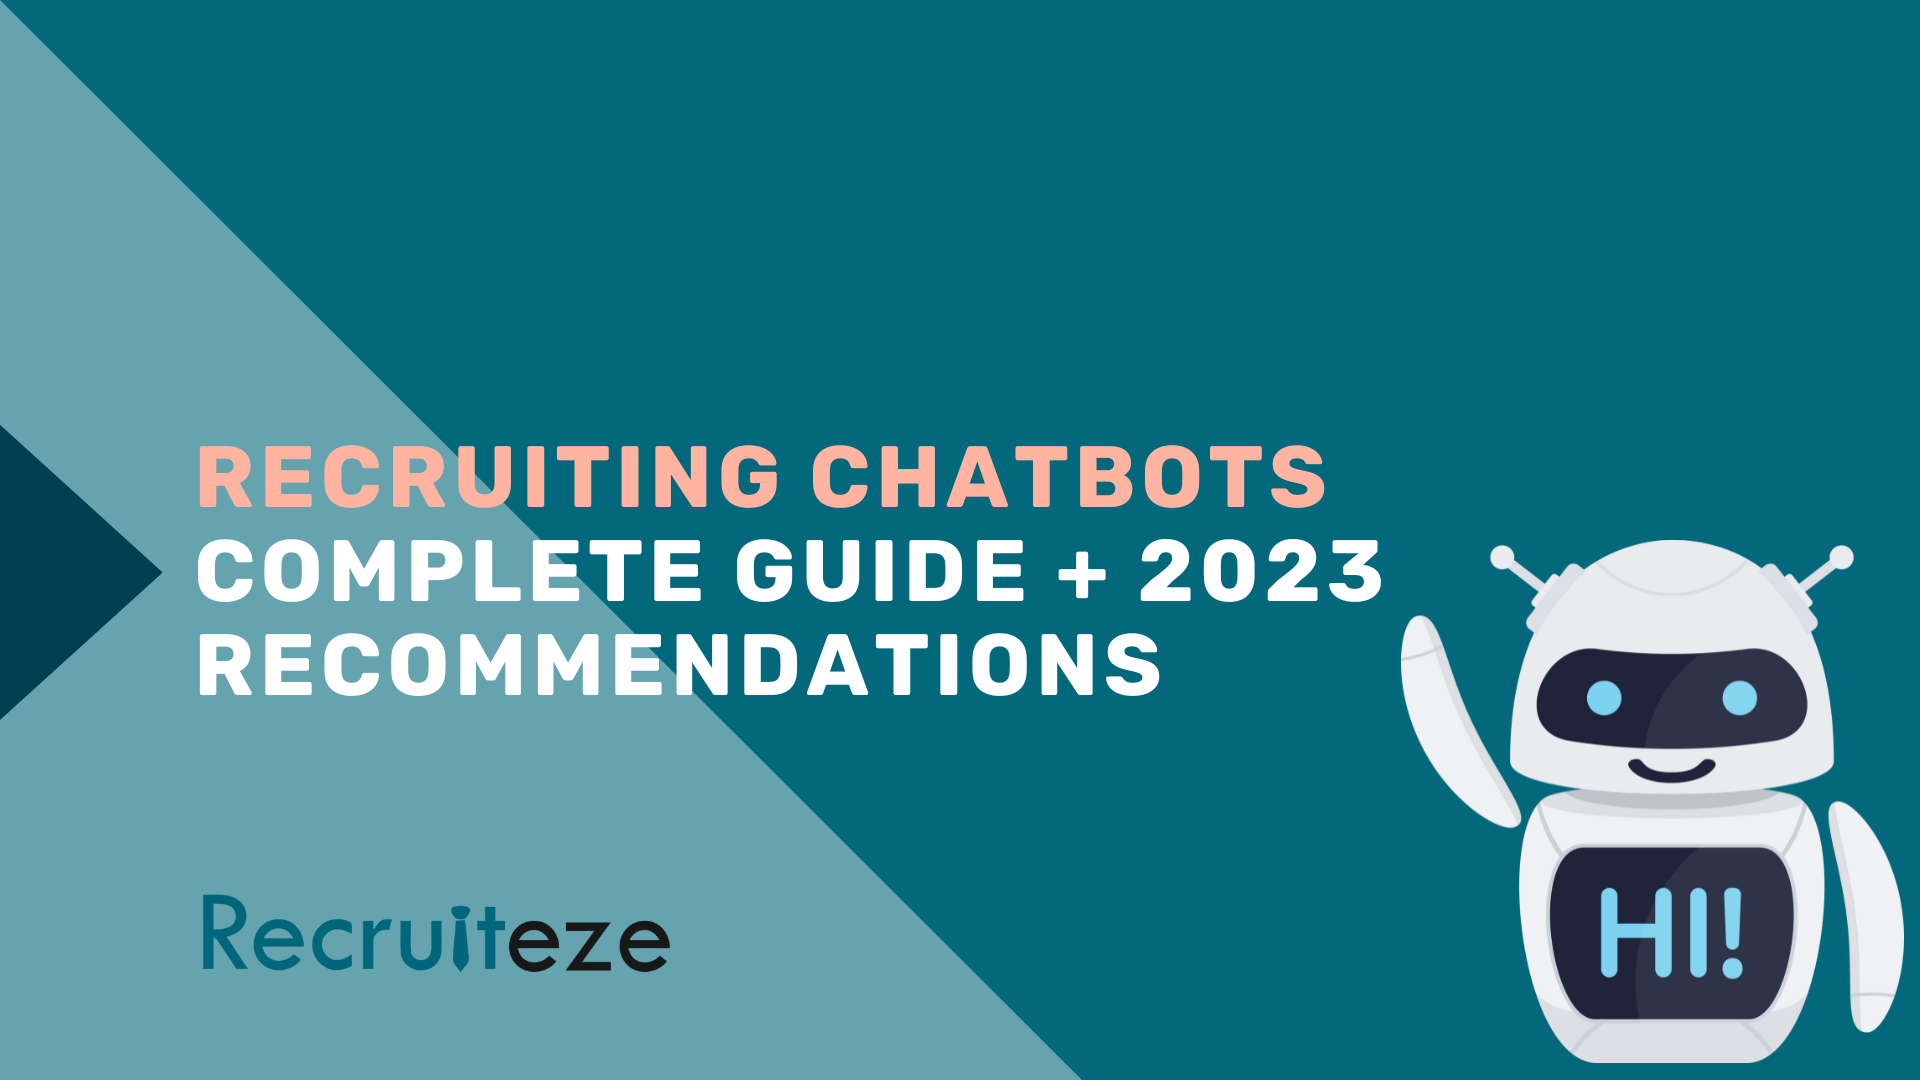 Recruiting Chatbots Complete Guide + 2023 Recommendations